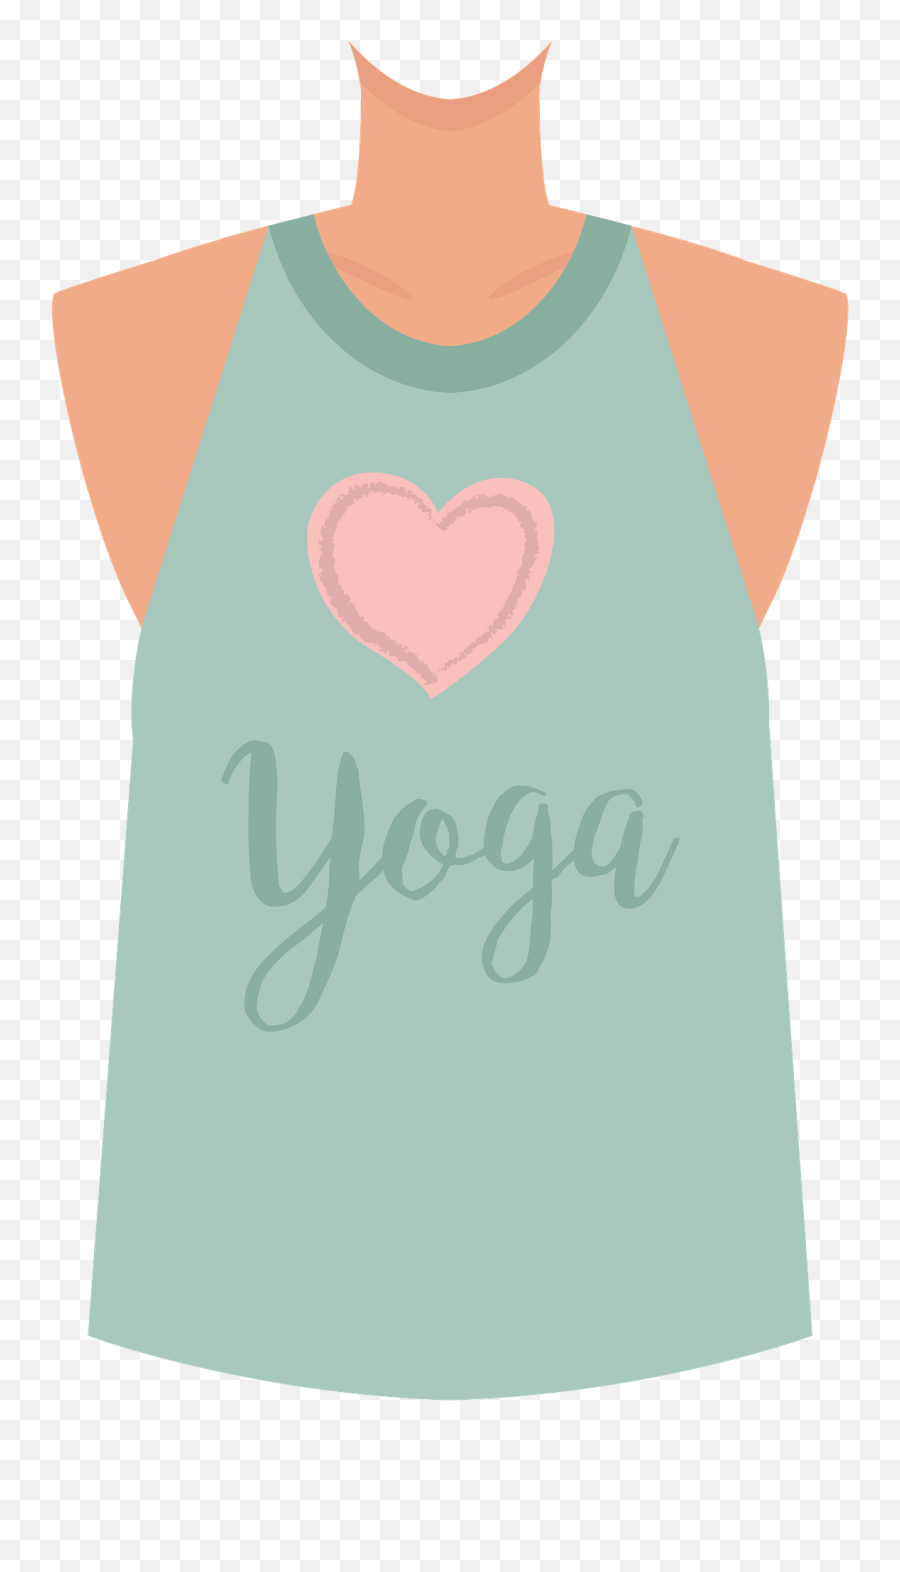 Girl Body In Yoga T - Shirt Clipart Free Download Transparent Girly Emoji,T-shirt Clipart